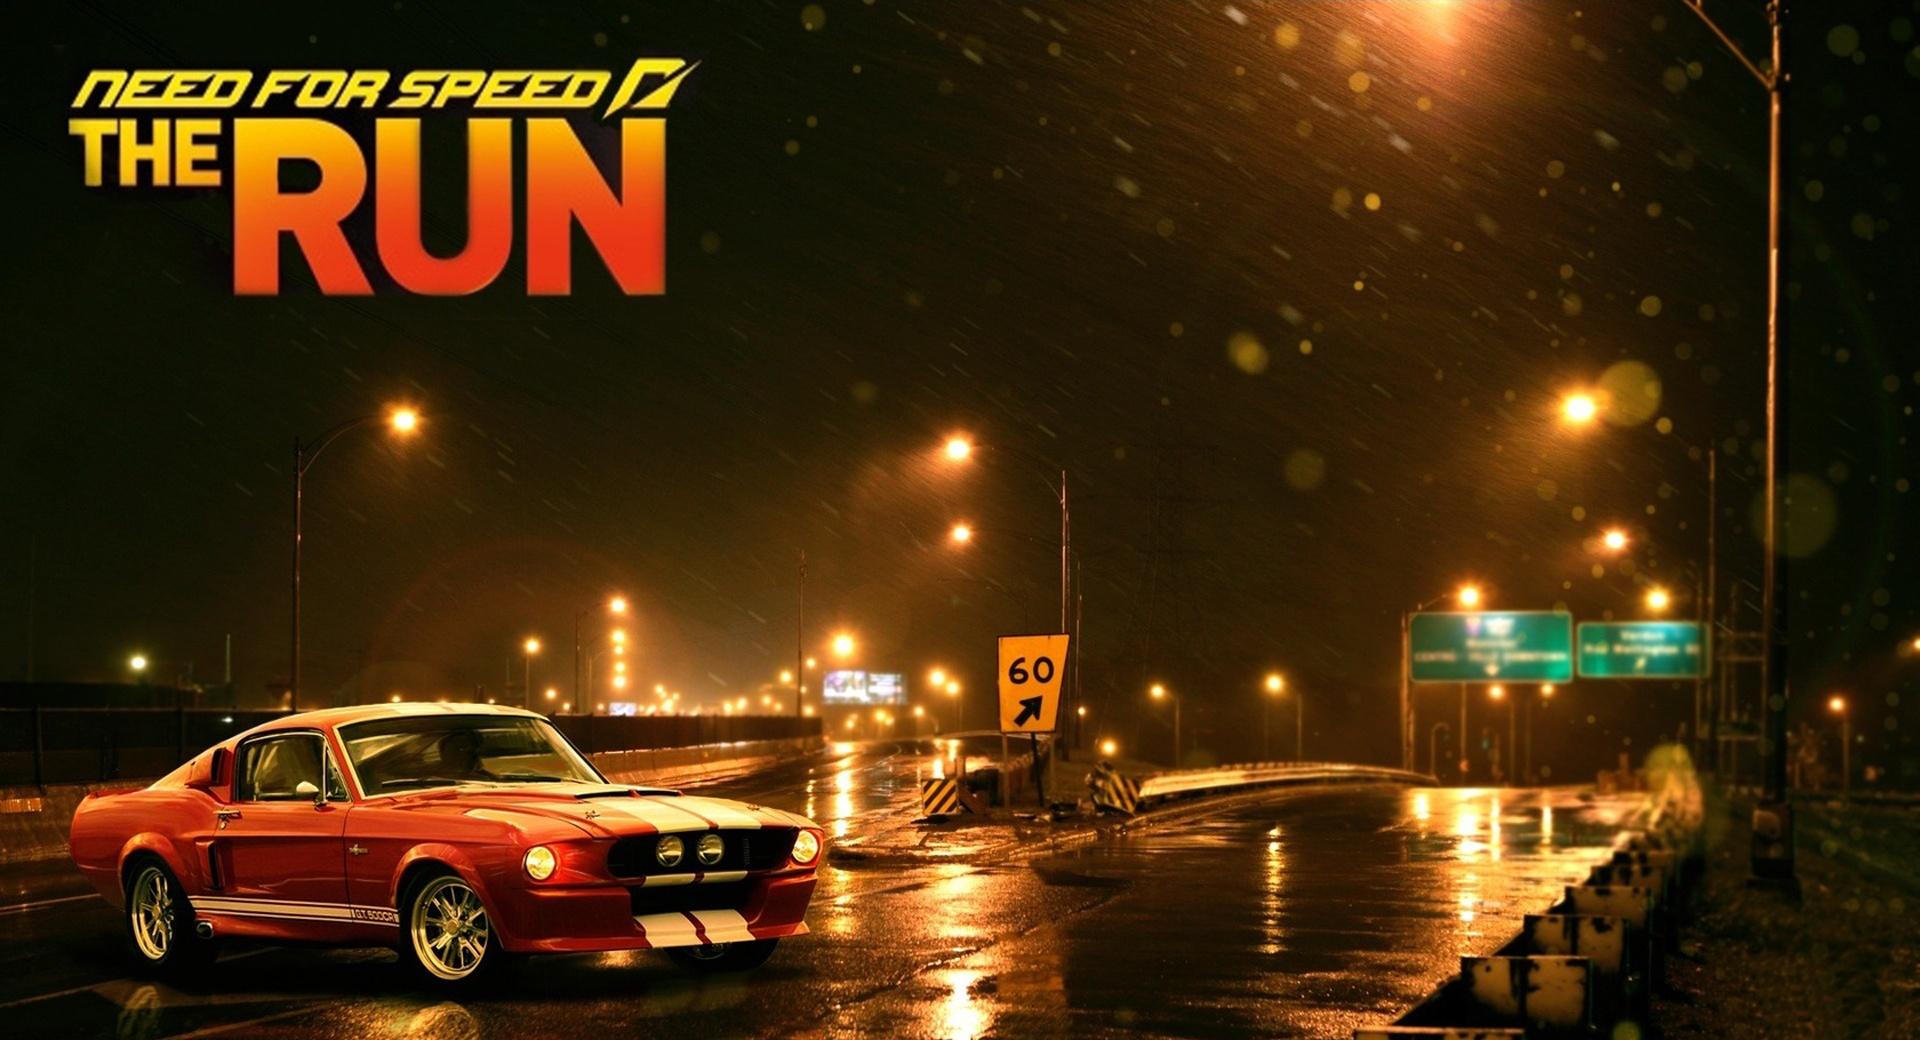 NFS The Ran wallpapers HD quality